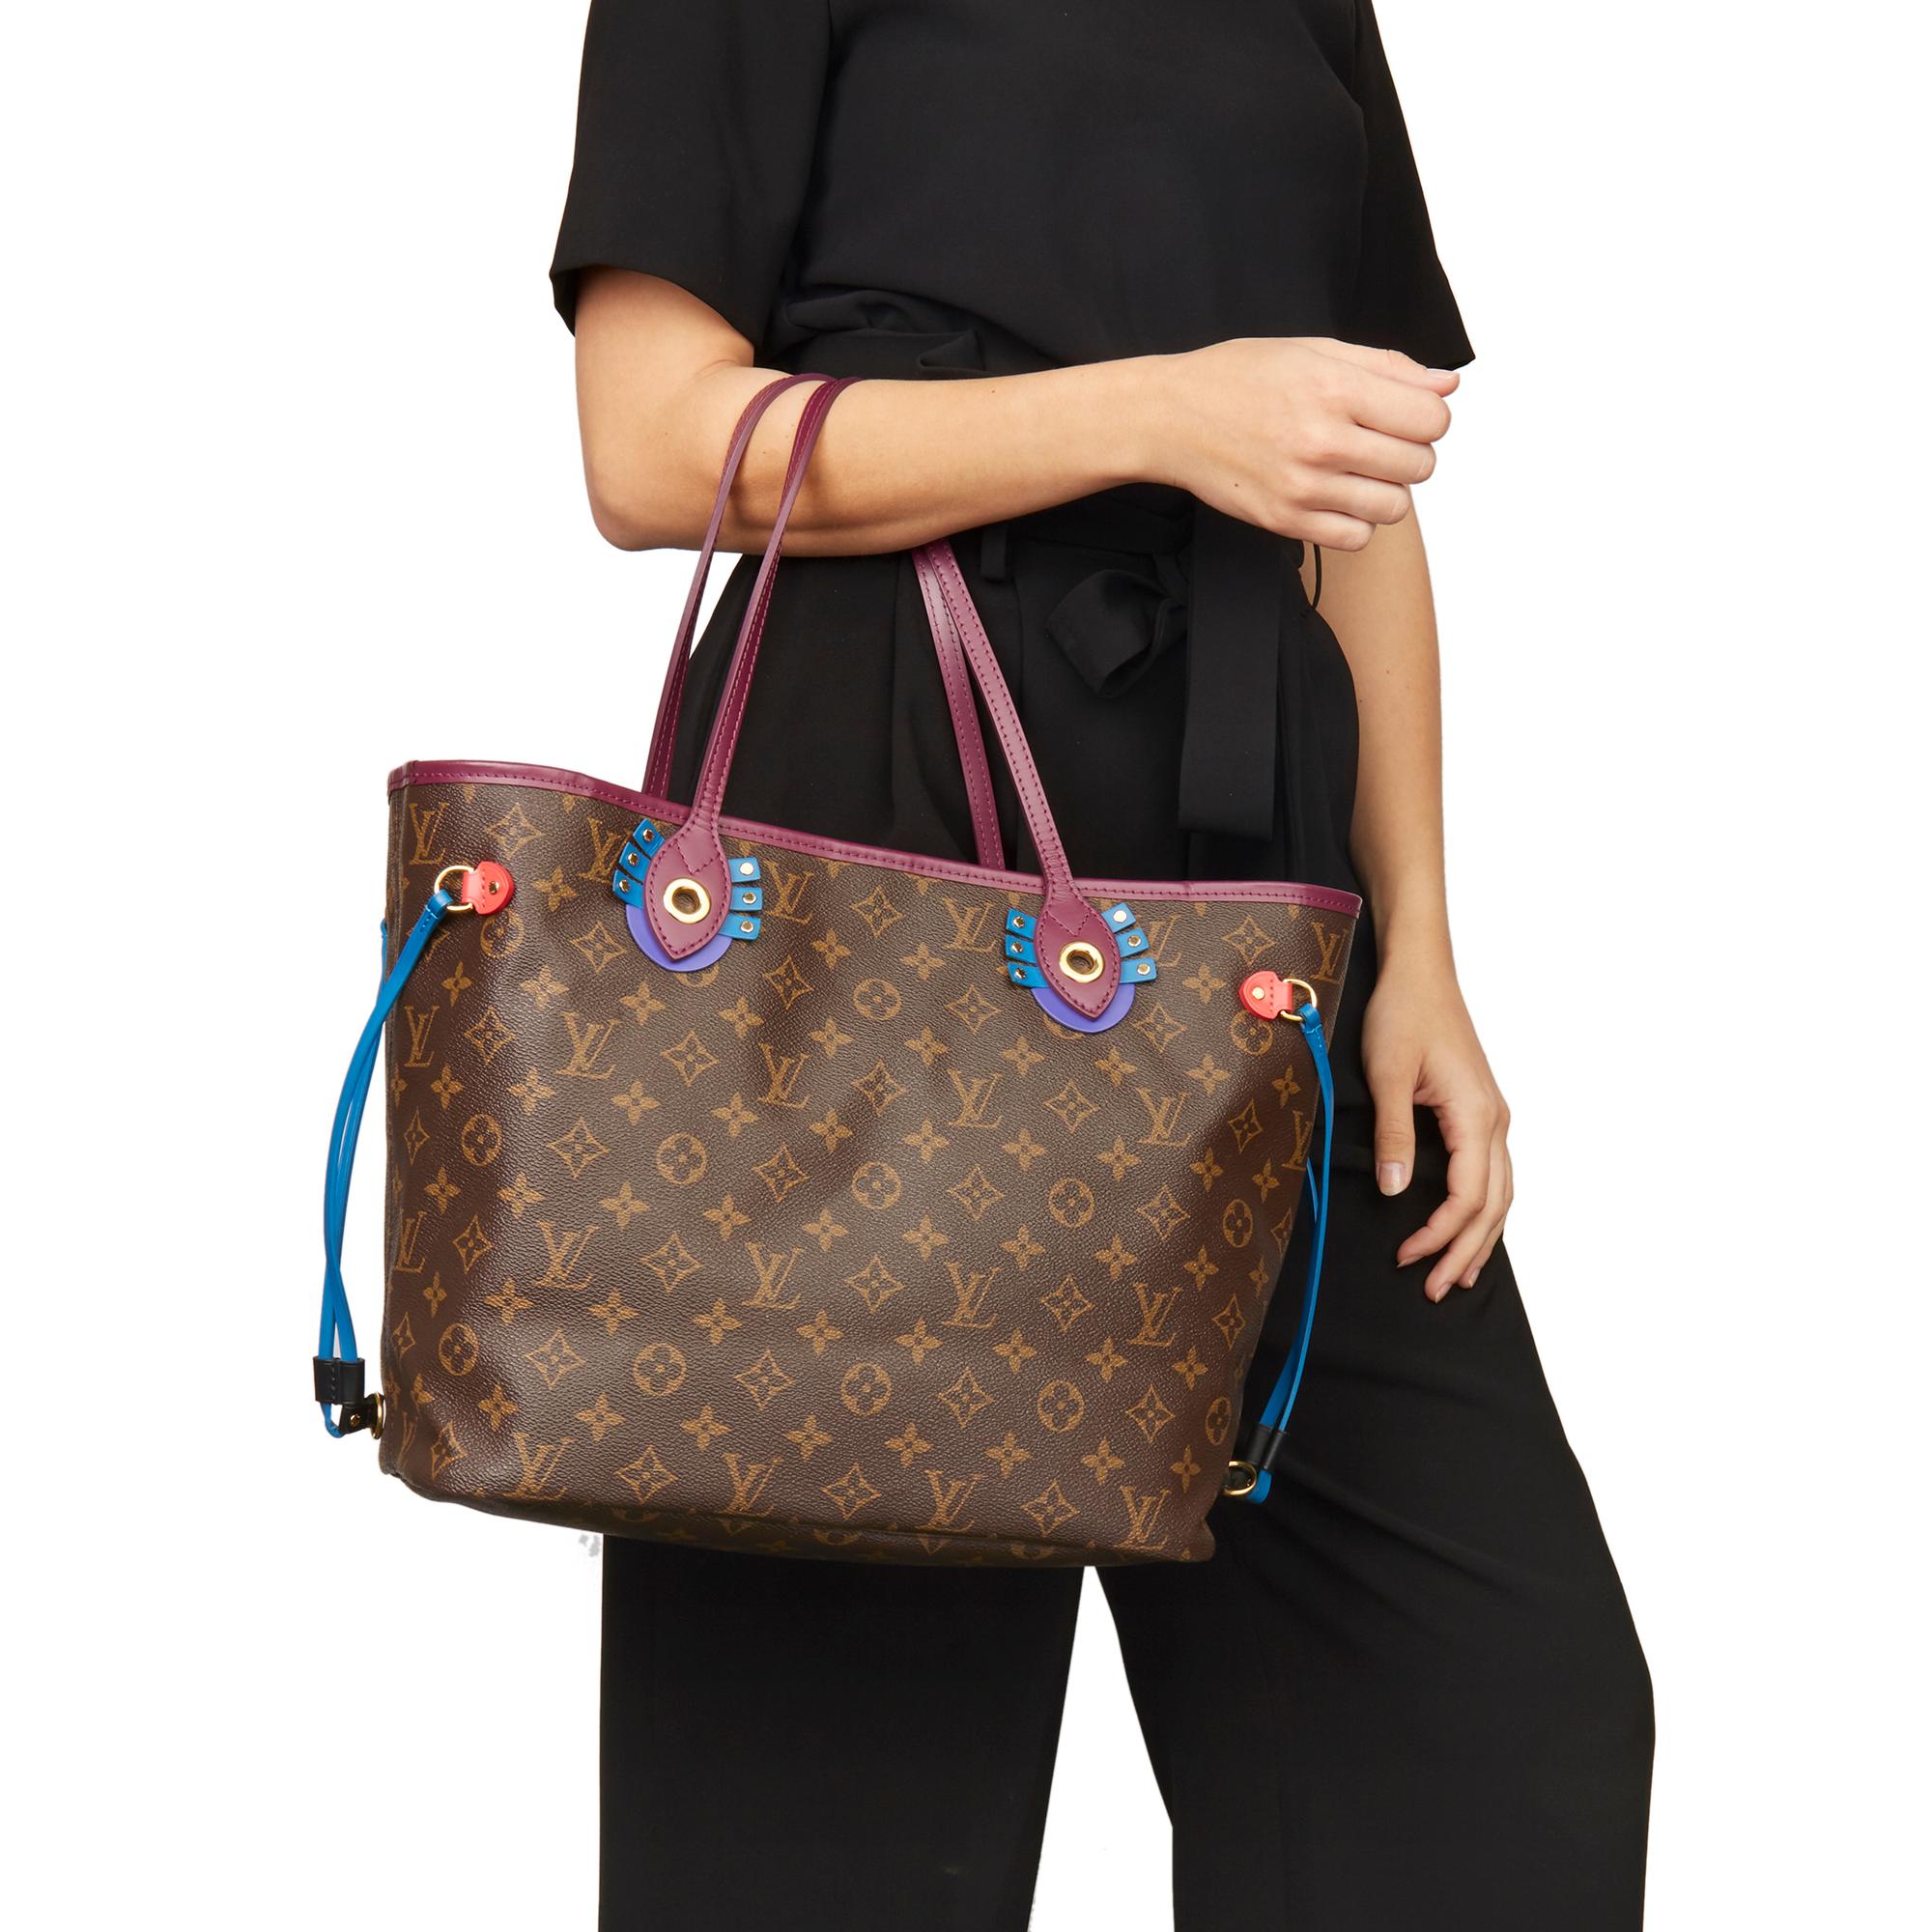 LOUIS VUITTON
Brown Monogram Coated Canvas Totem Neverfull MM

Xupes Reference: HB3052
Serial Number: GI4165
Age (Circa): 2015
Accompanied By: Louis Vuitton Dust Bag
Authenticity Details: Date Stamp (Made in Spain) 
Gender: Ladies
Type: Shoulder,